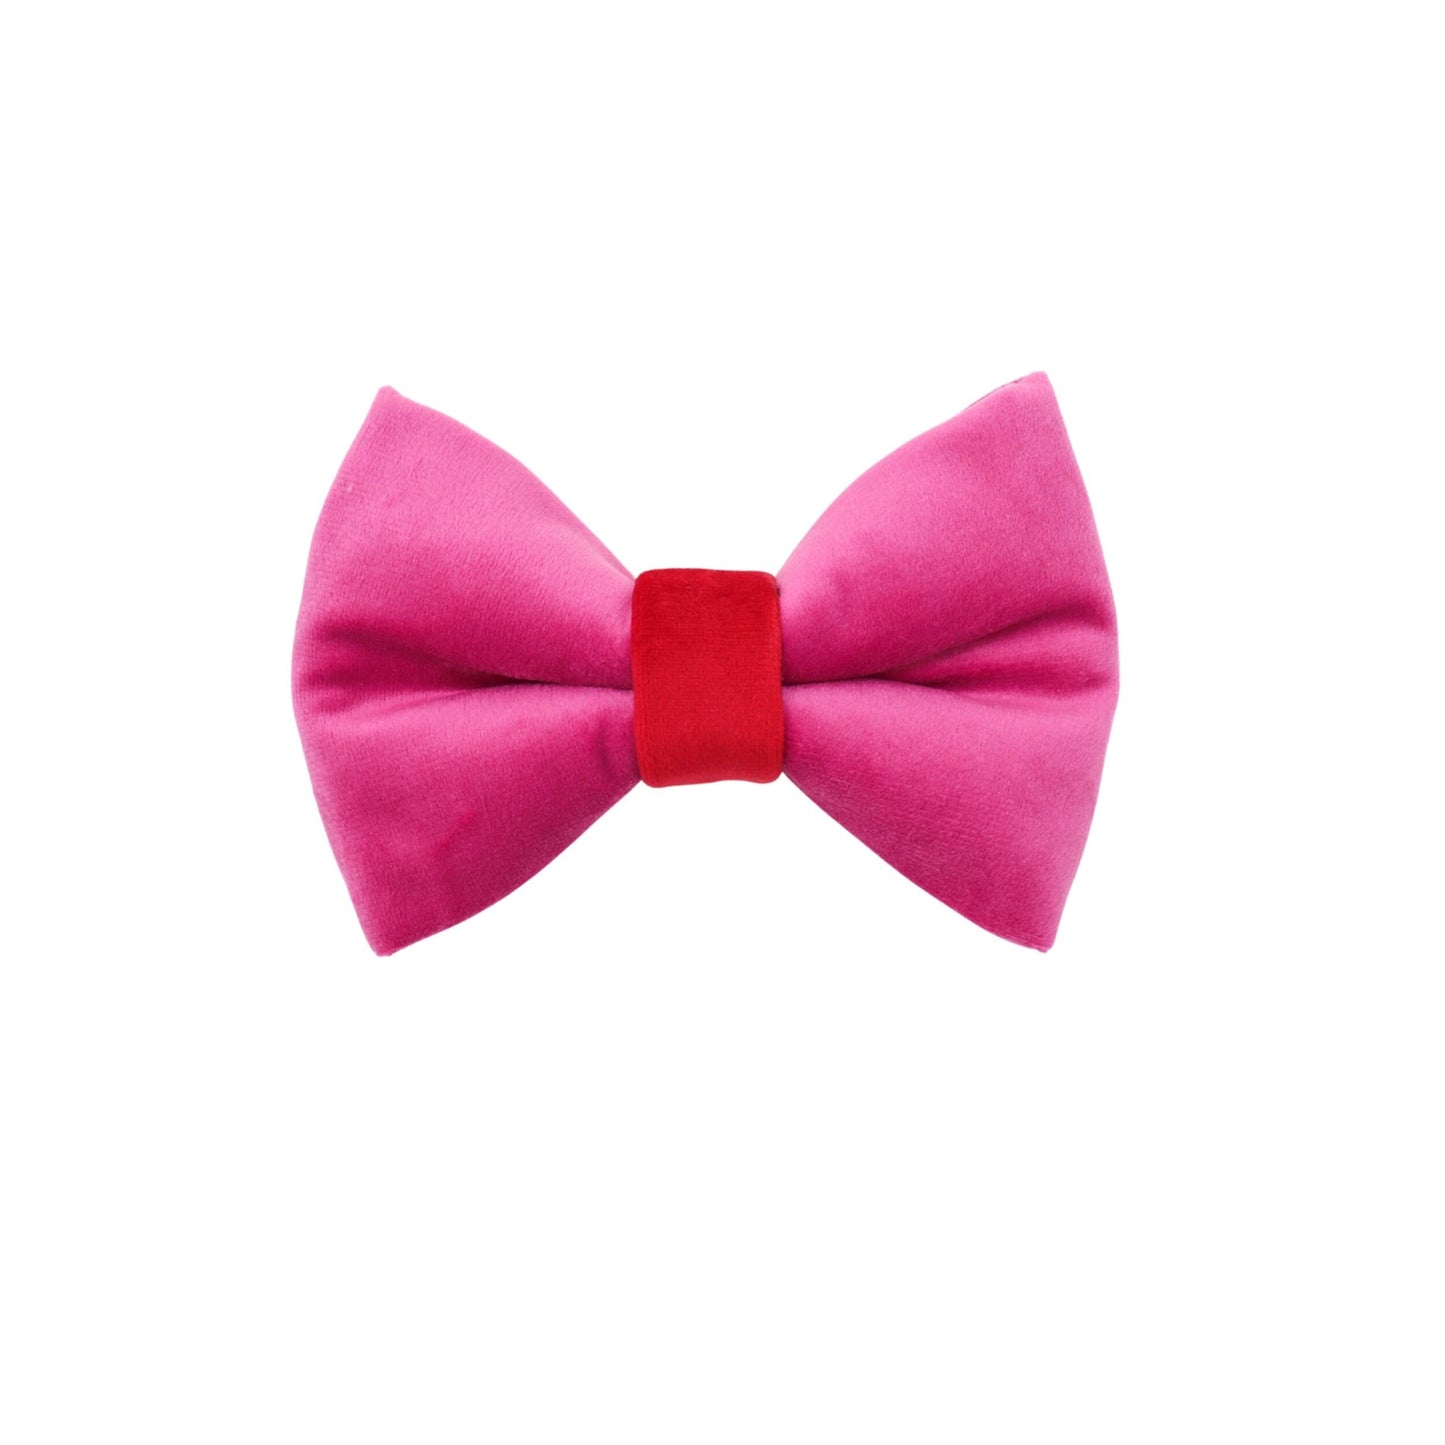 "ELECTRIC LOVE"" PUFFY BOWTIES